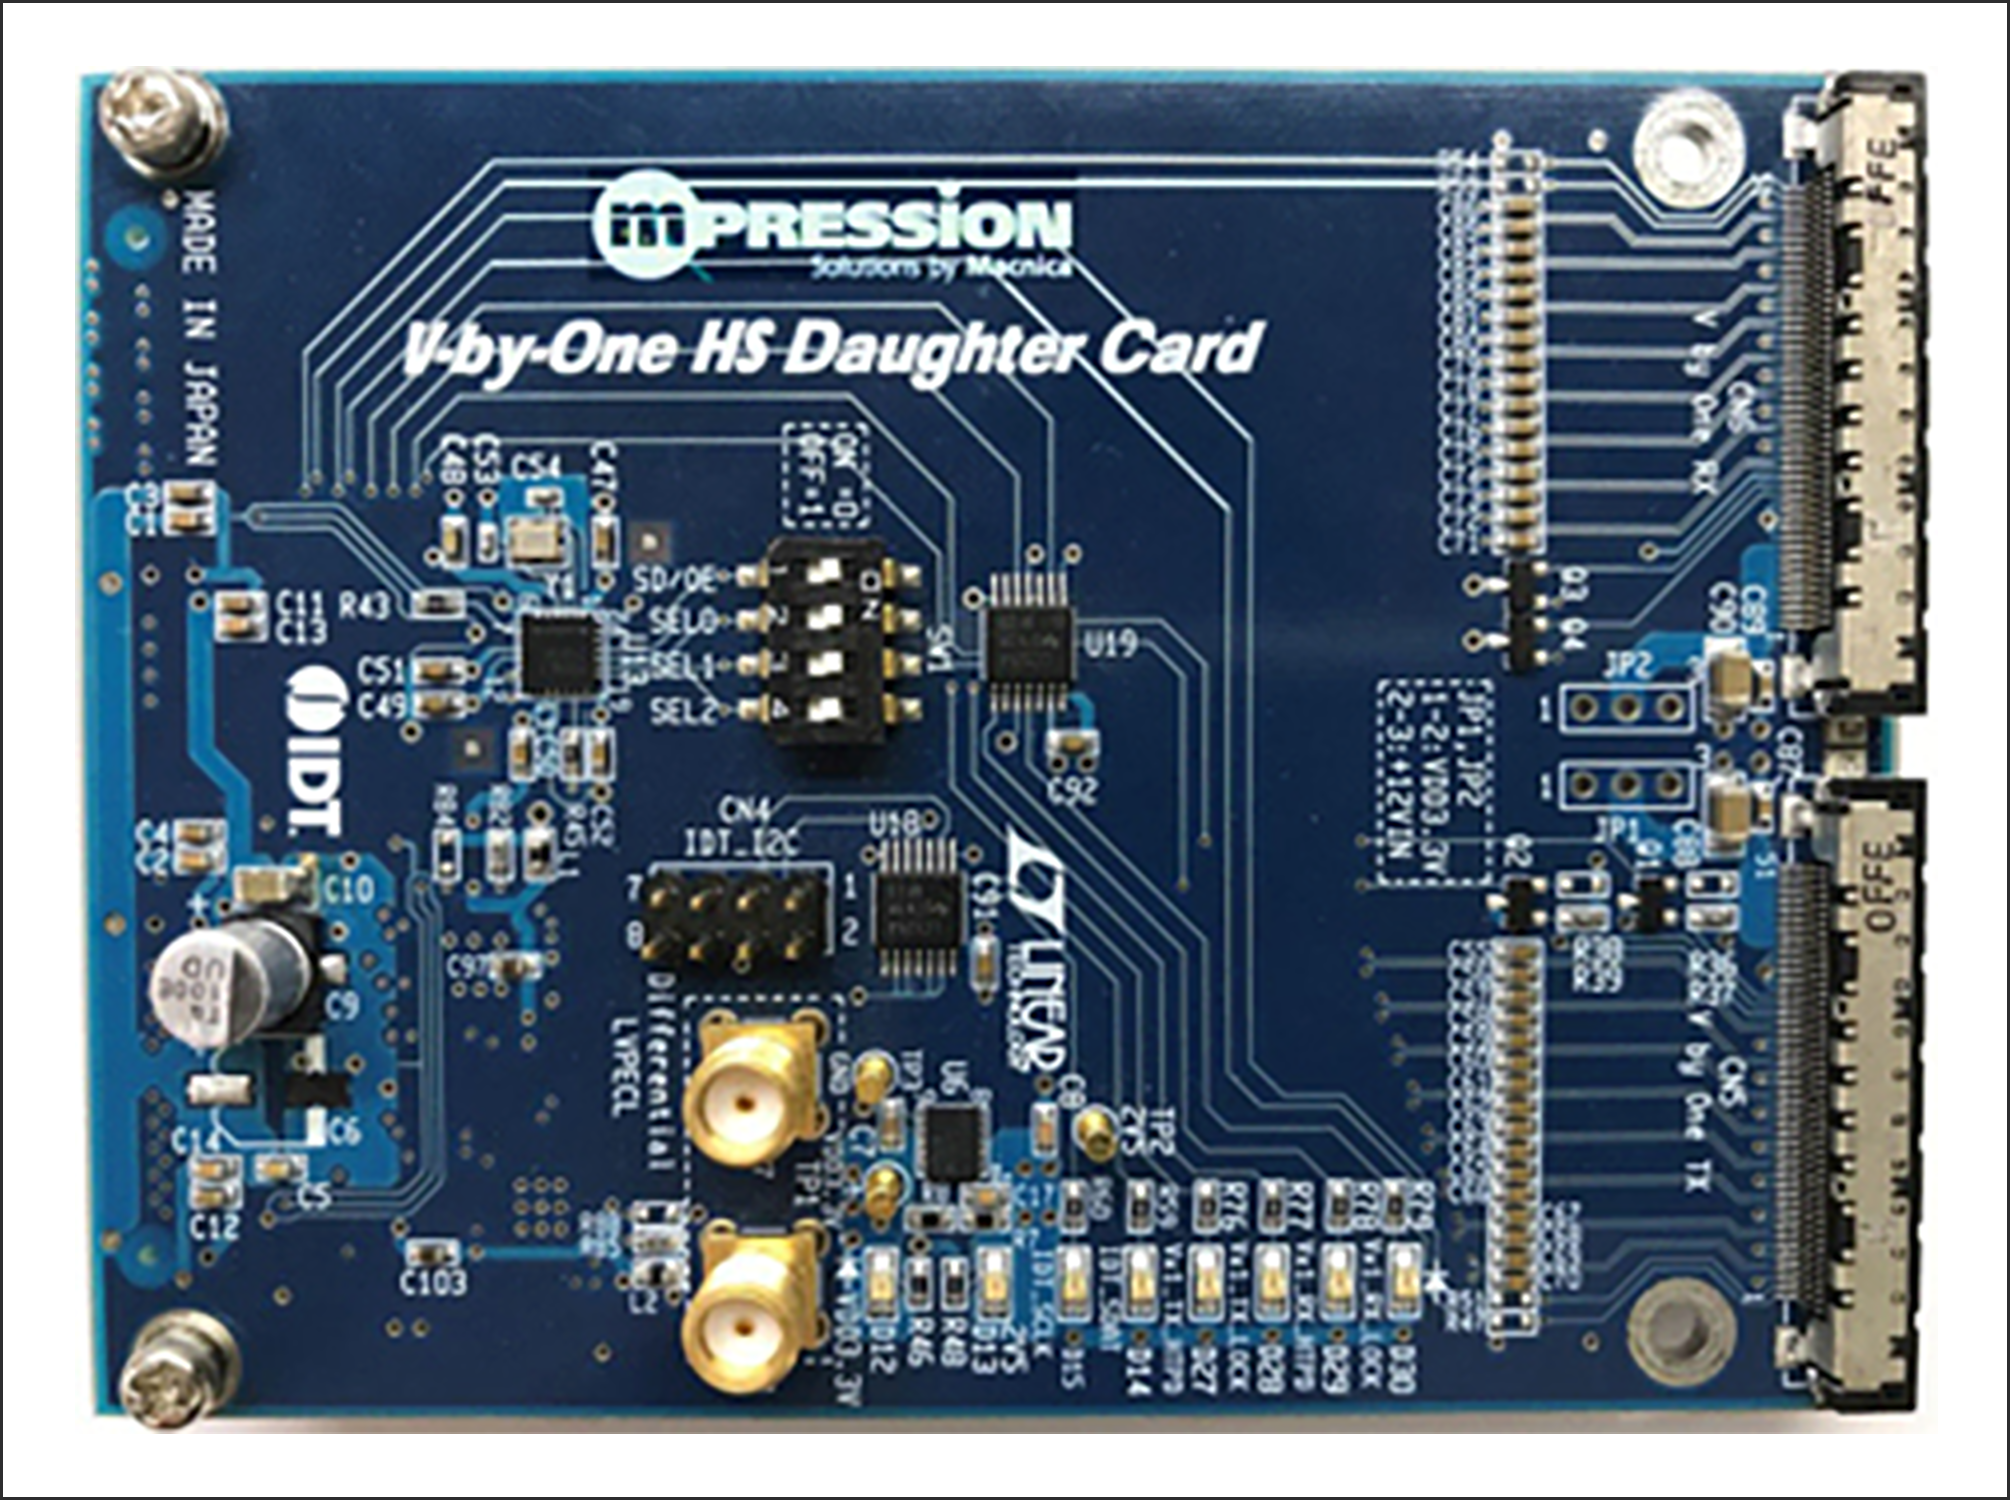 V-by-One® HS HSMC Card